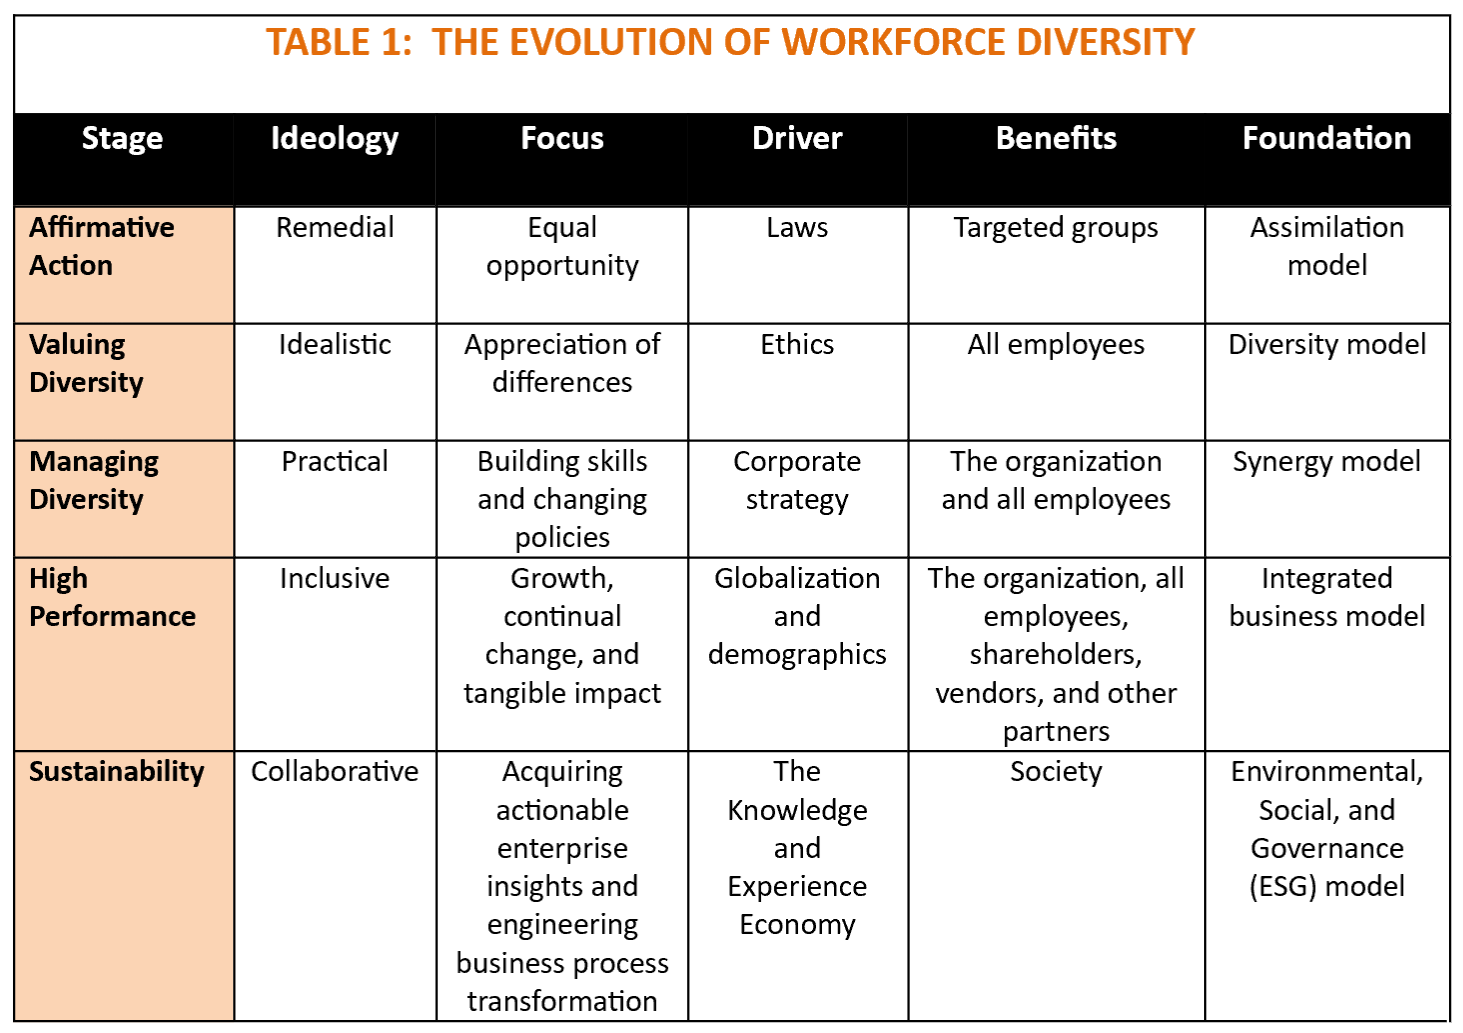 A table charting the Evolution of Workforce Diversity